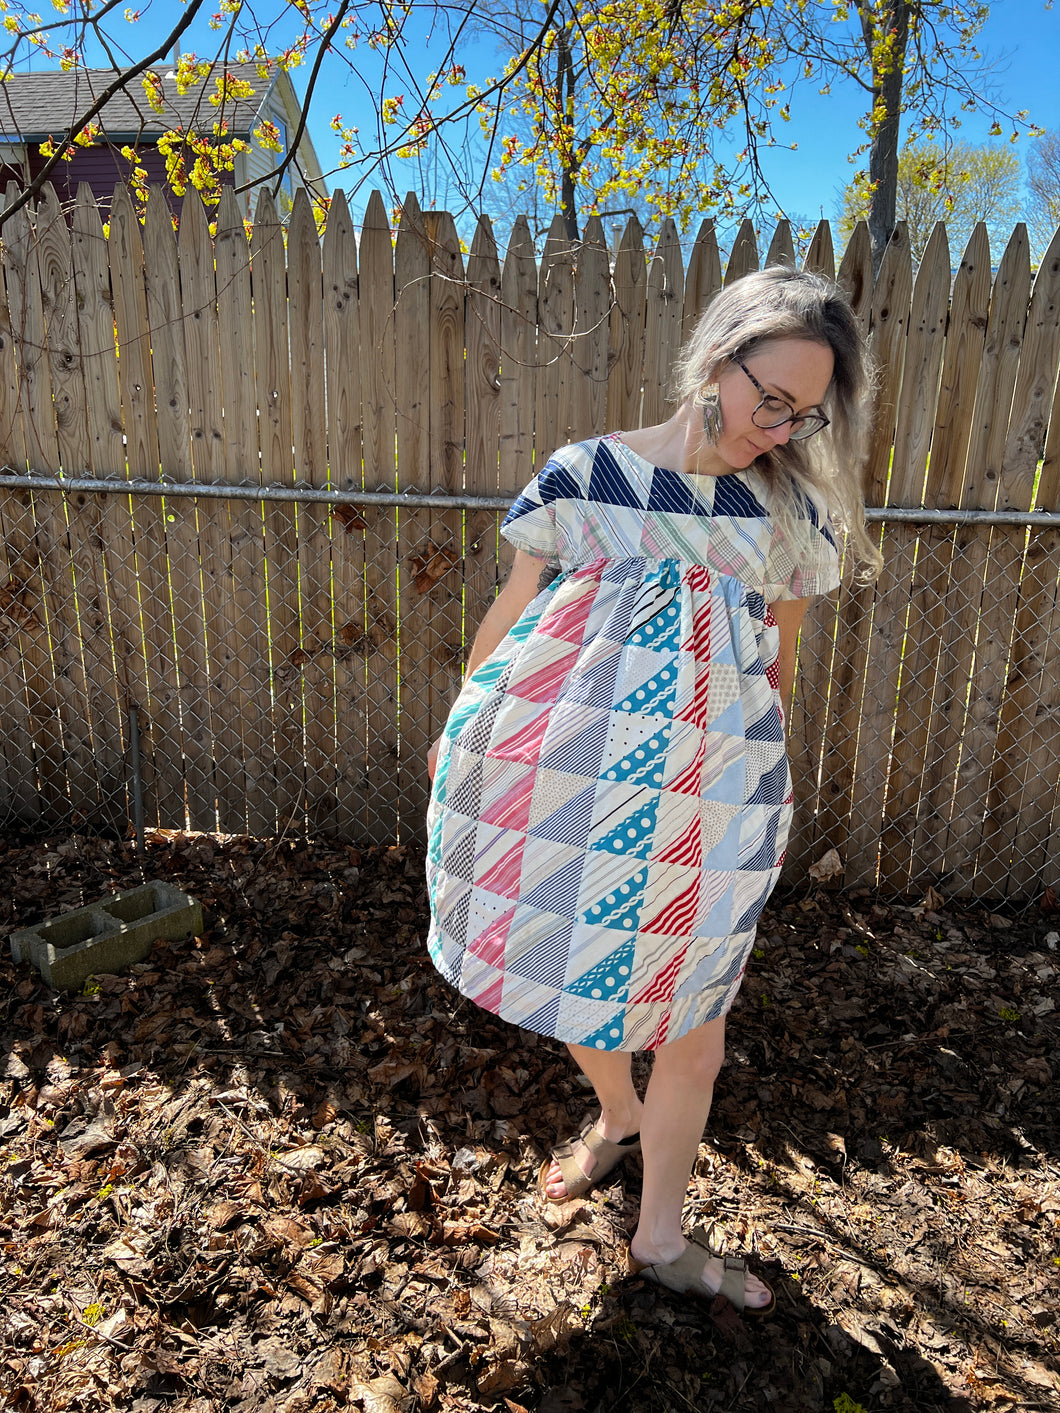 One-of-a-Kind: Half Square Triangle Swing Dress